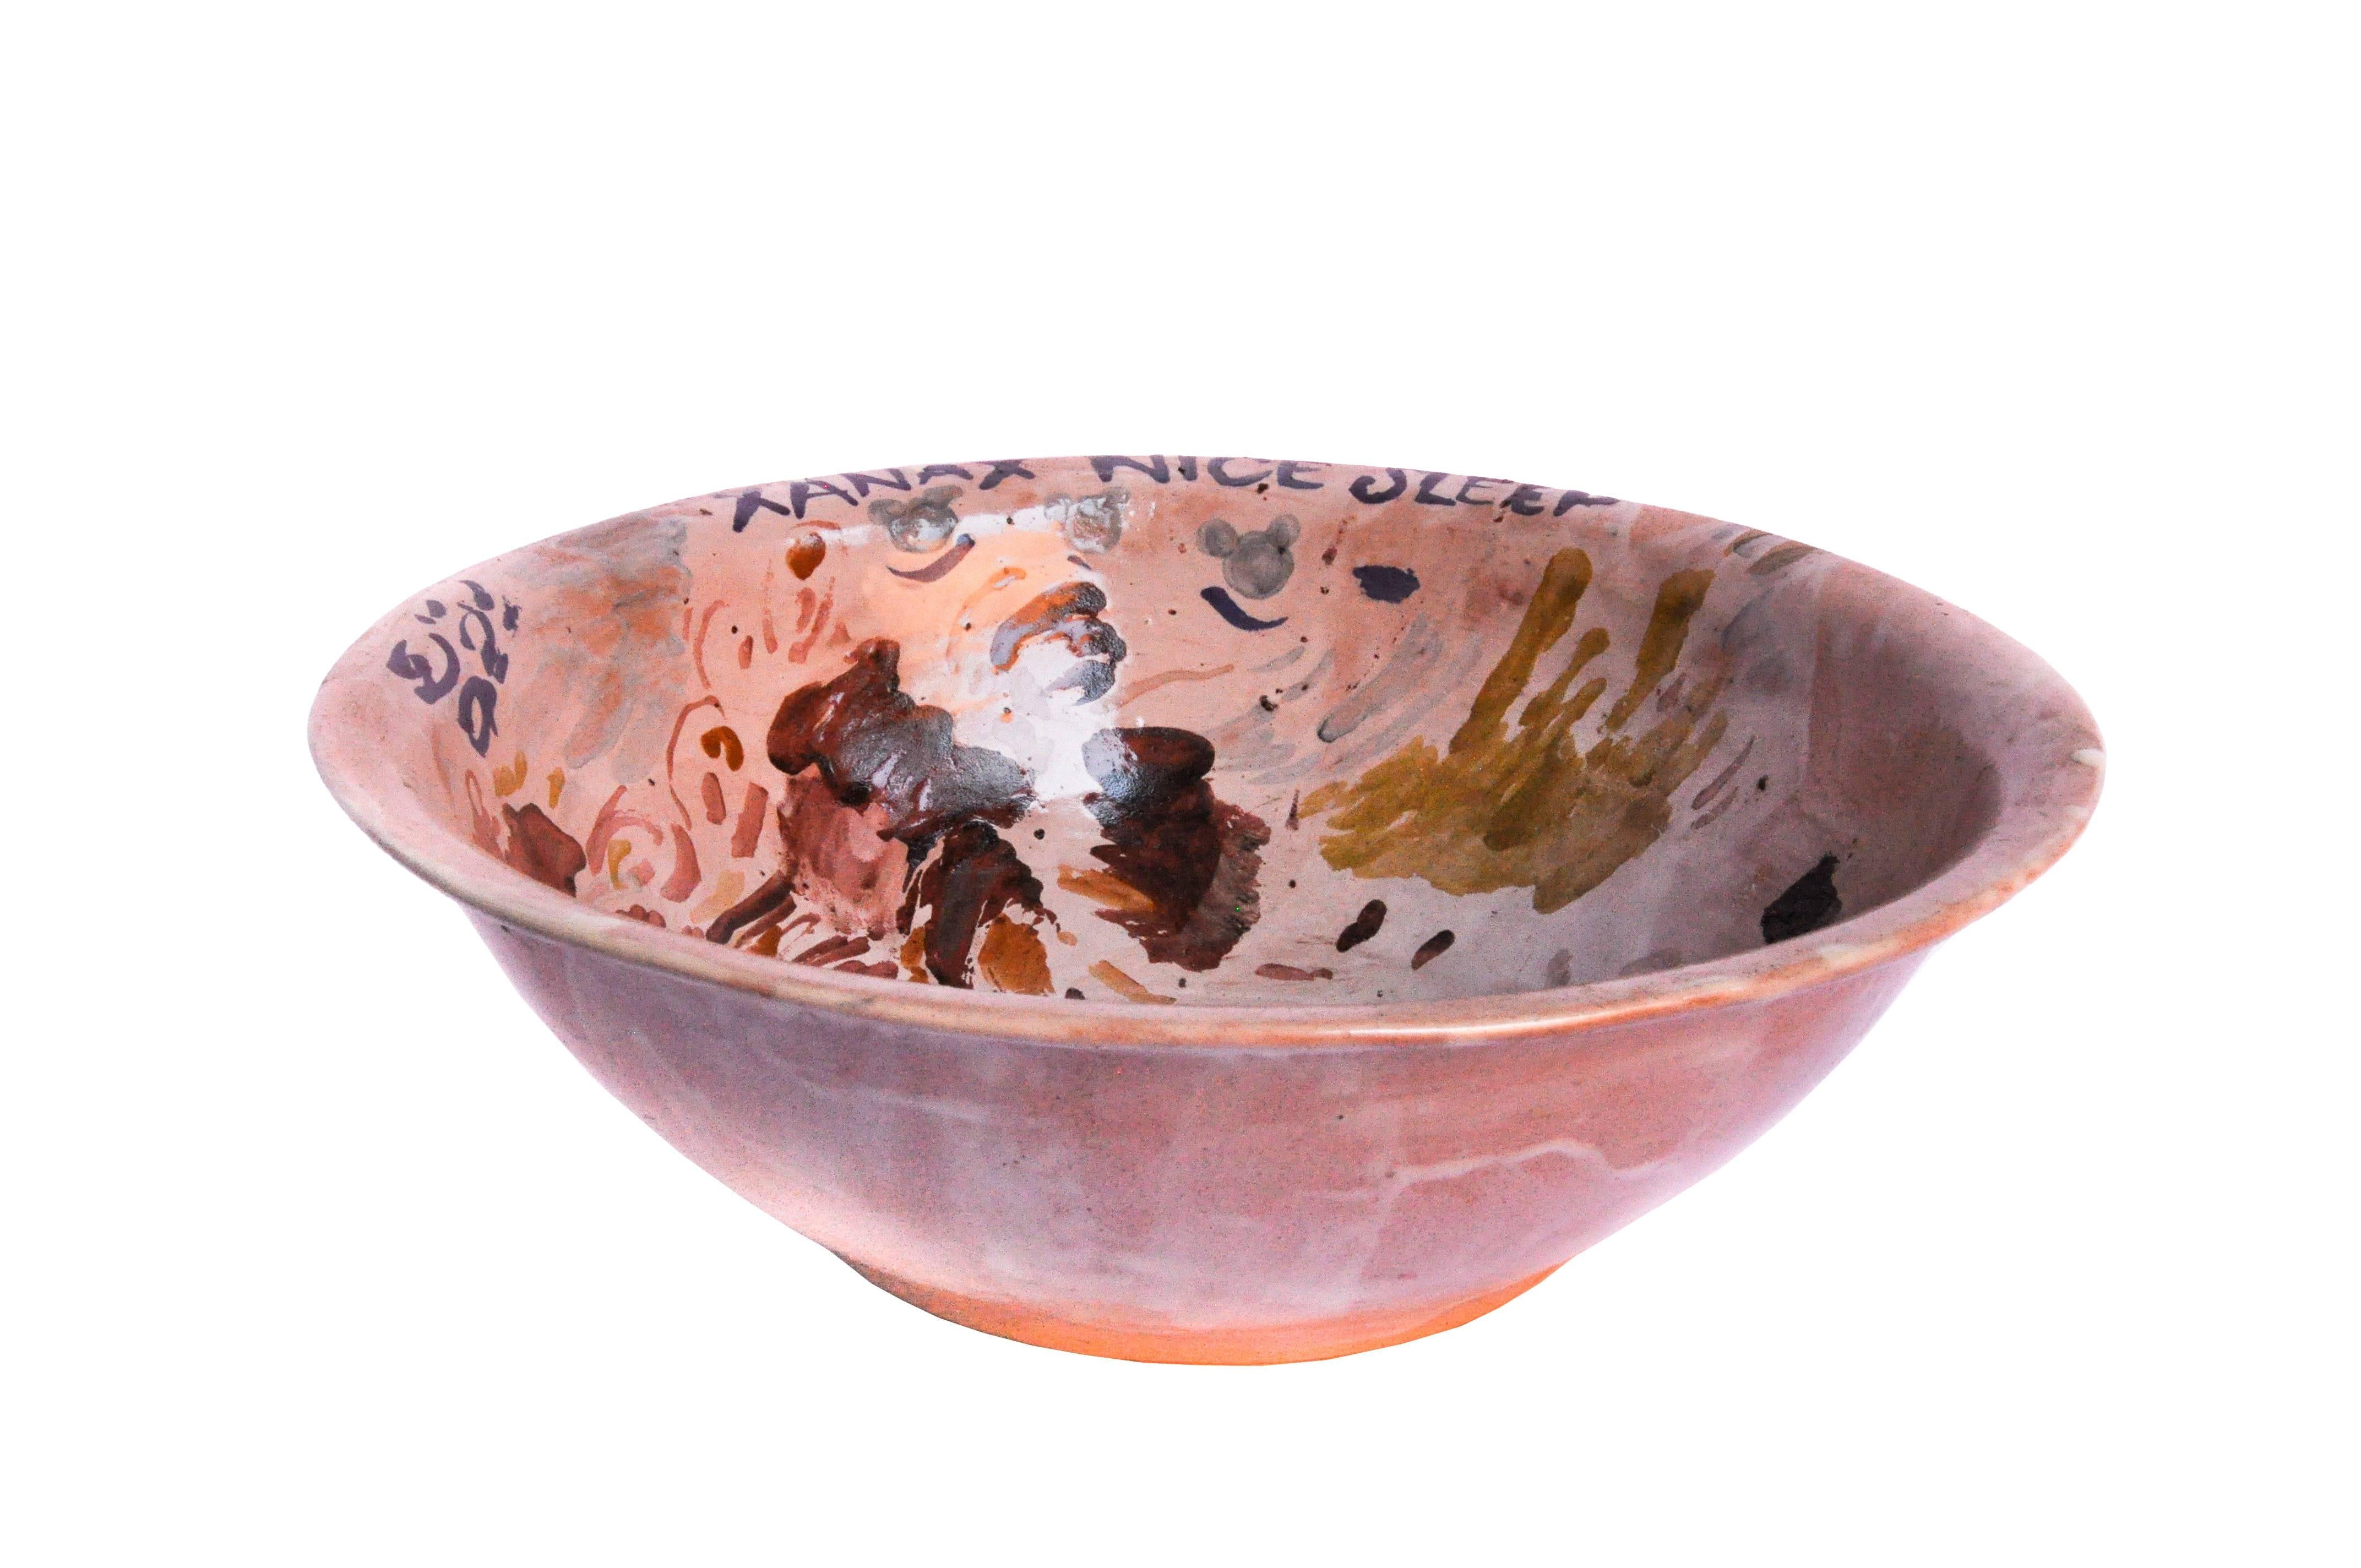 By Lorenzo Lorenzzo

“I spent a long time watching sunsets on the terrace…inspired by the nature surrounding the studio,” says artist Lorenzo Lorenzzo. 

This majolica decorative bowl is a perfect example of Lorenzo's artistic personality. This